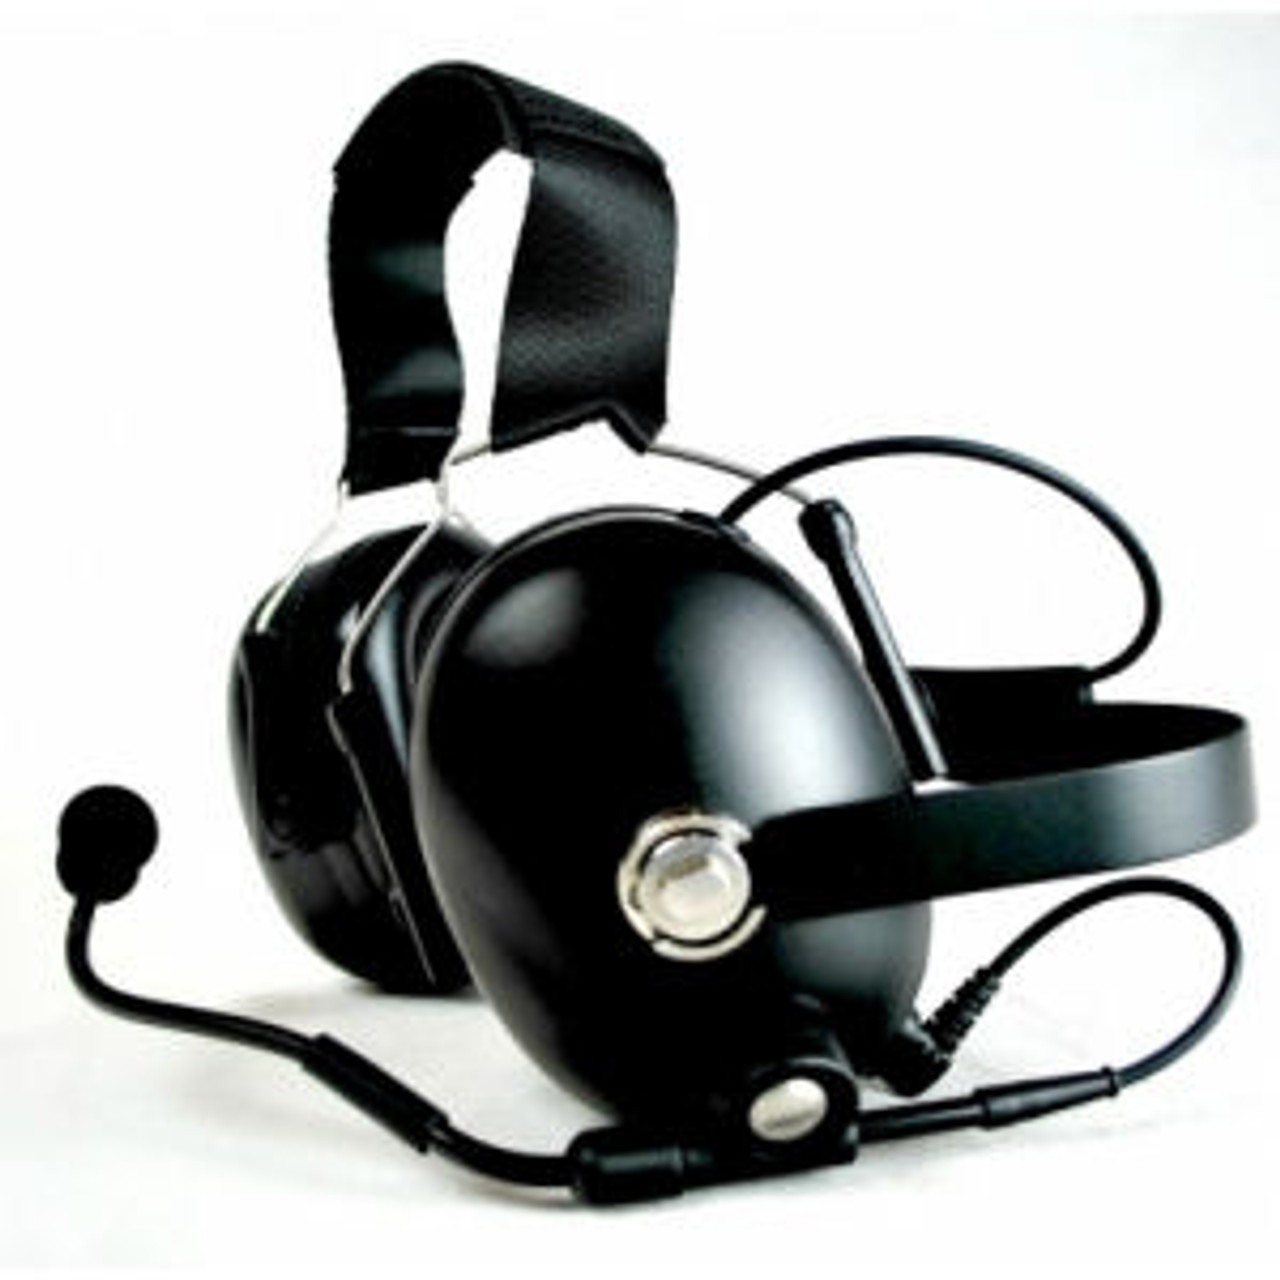 EF Johnson TK-5230 Noise Canceling Double Muff Behind The Head Headset